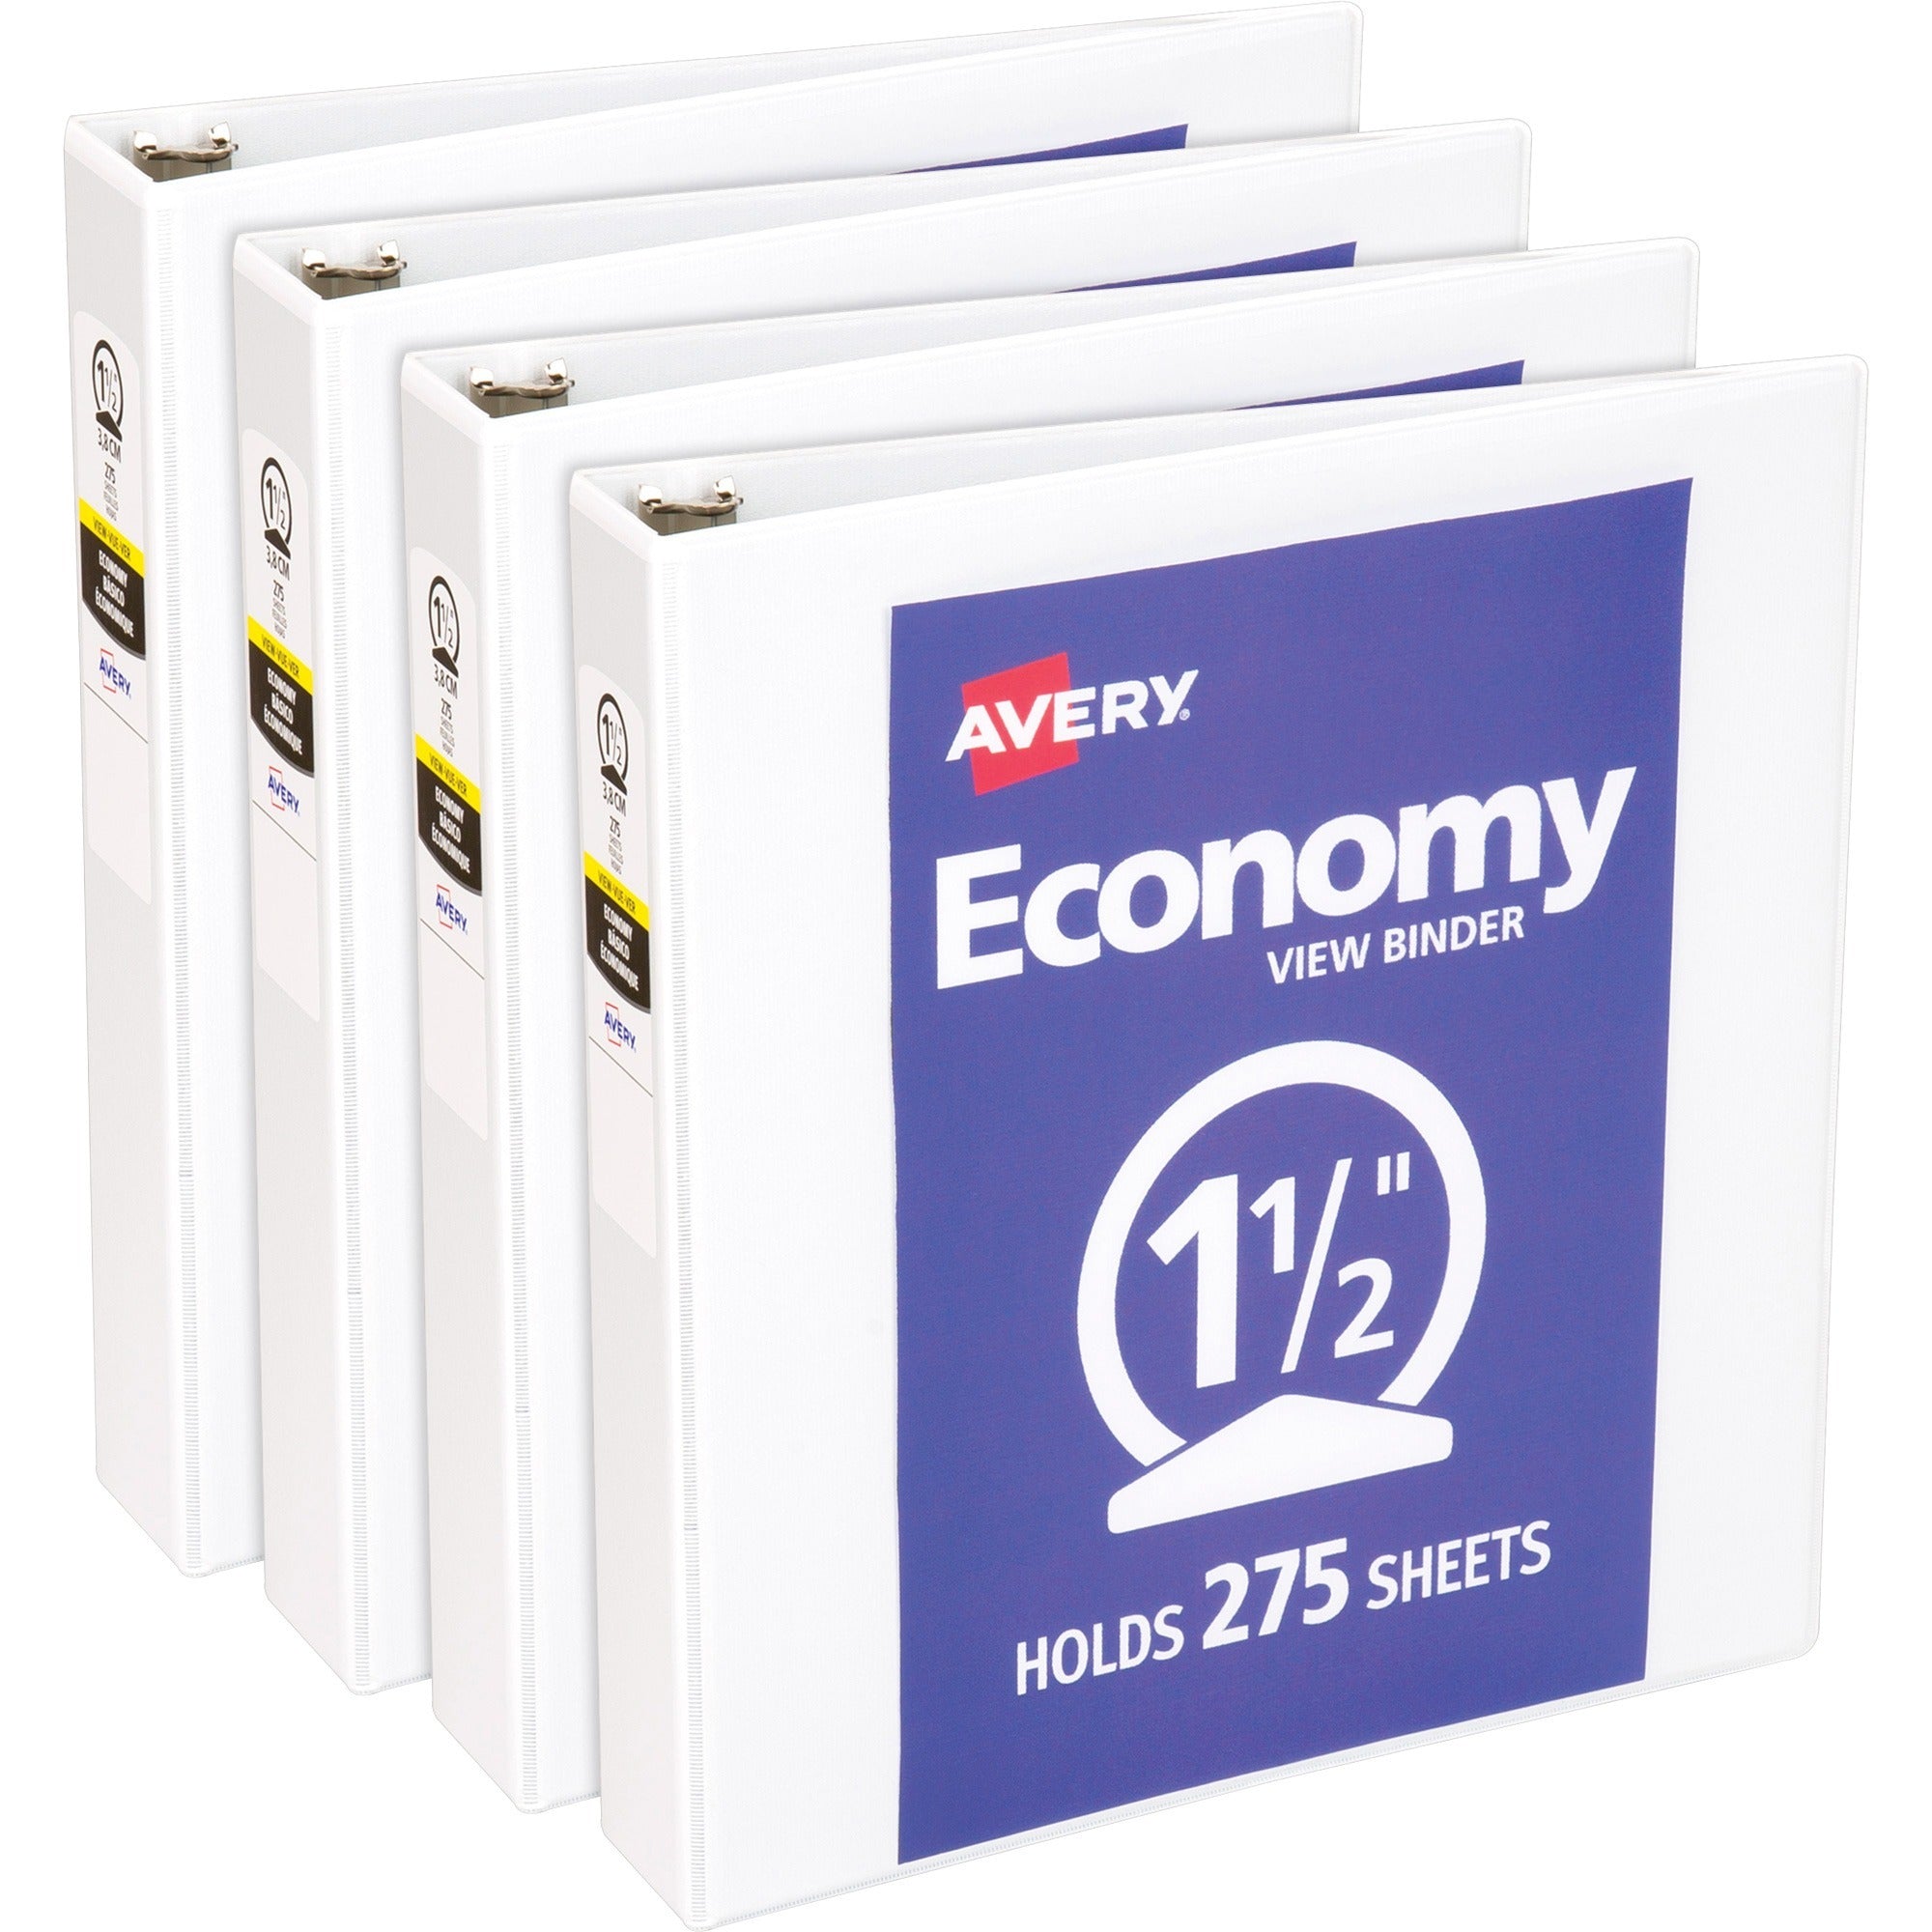 avery-economy-view-binder_ave05726bd - 1